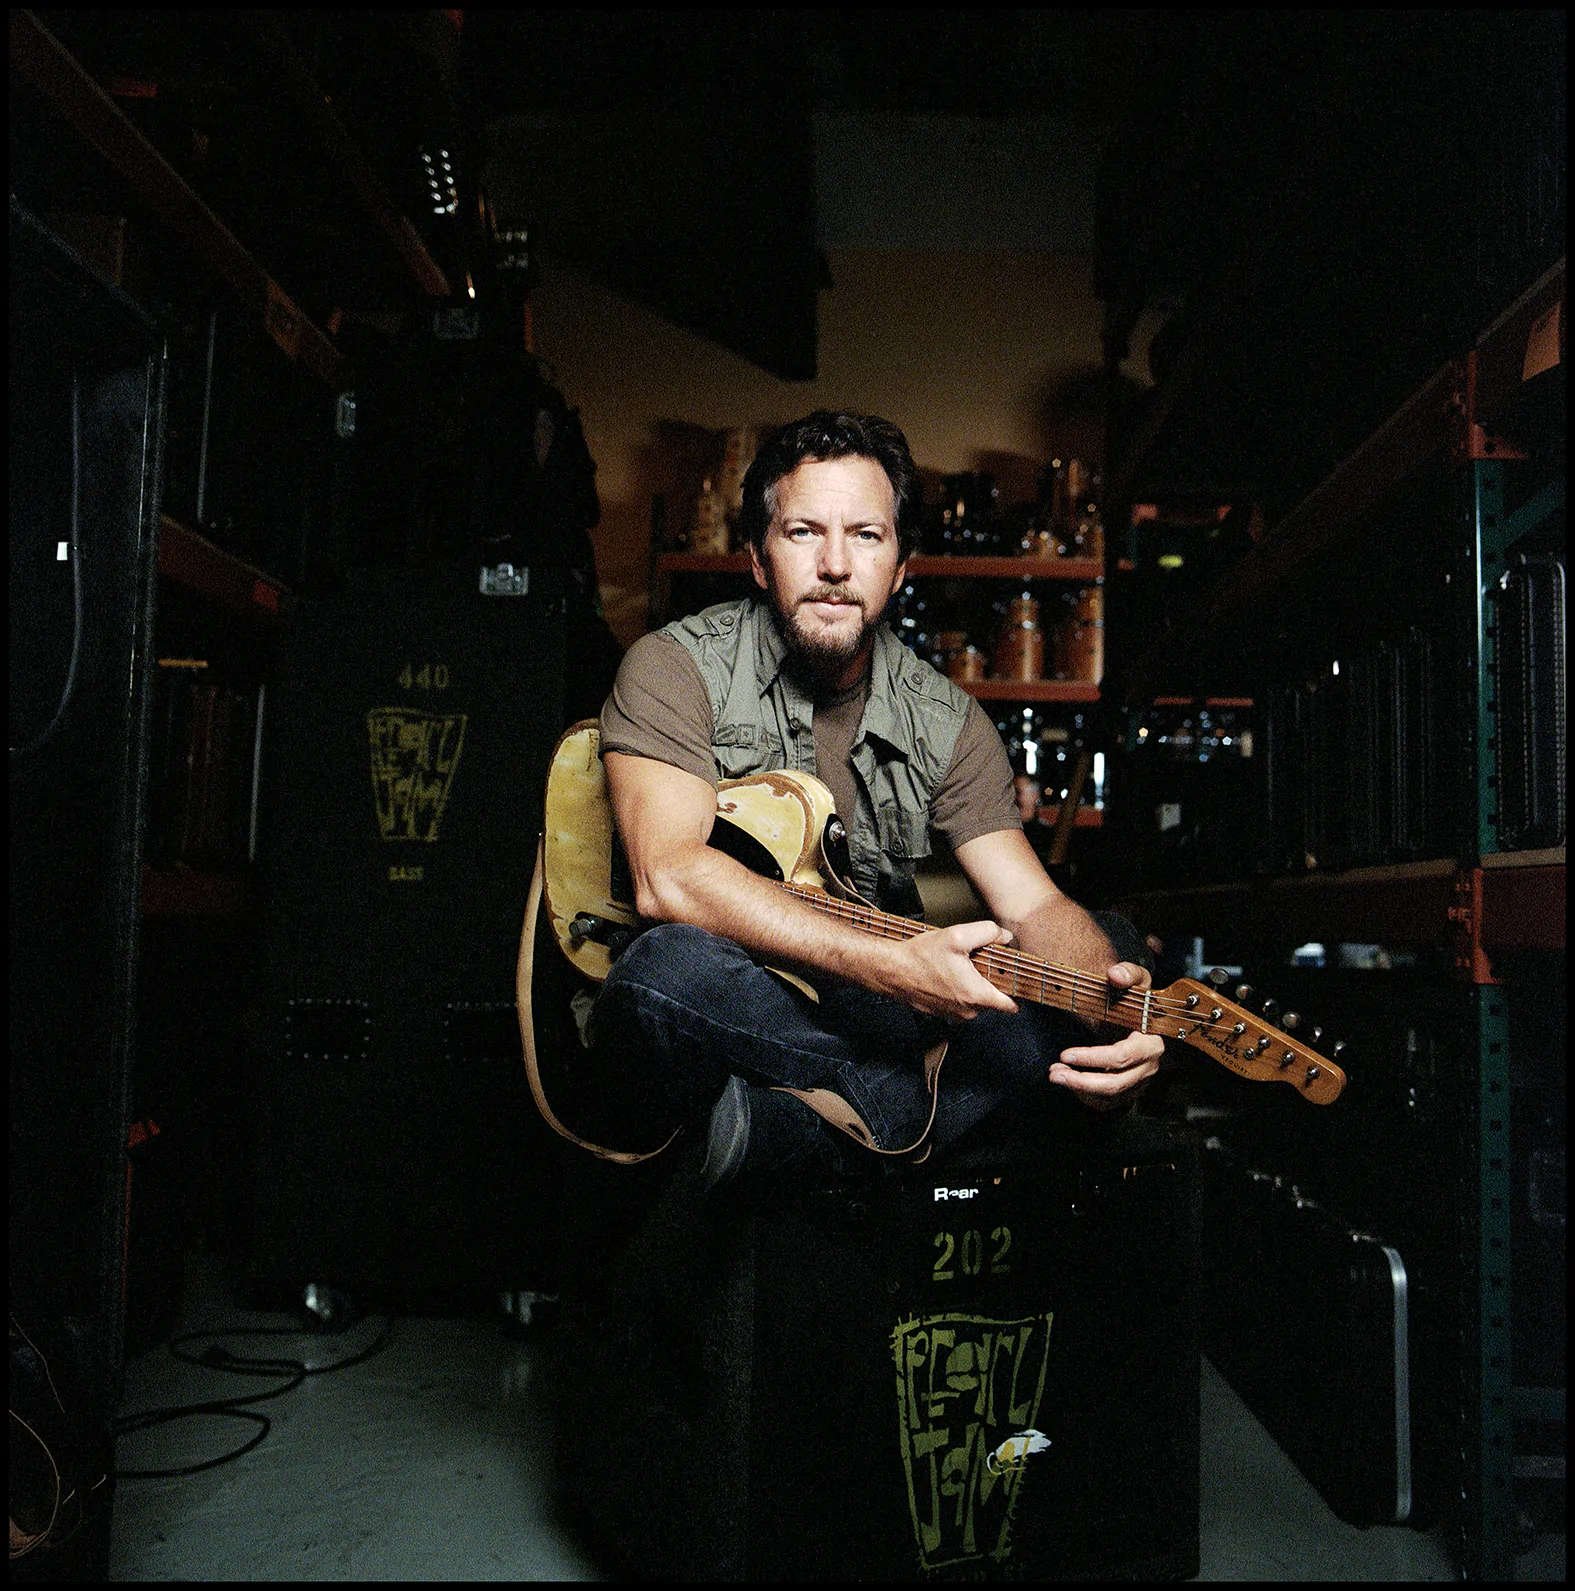 EDDIE VEDDER unveils new tracks ‘Matter of Time’ and ‘Say Hi’